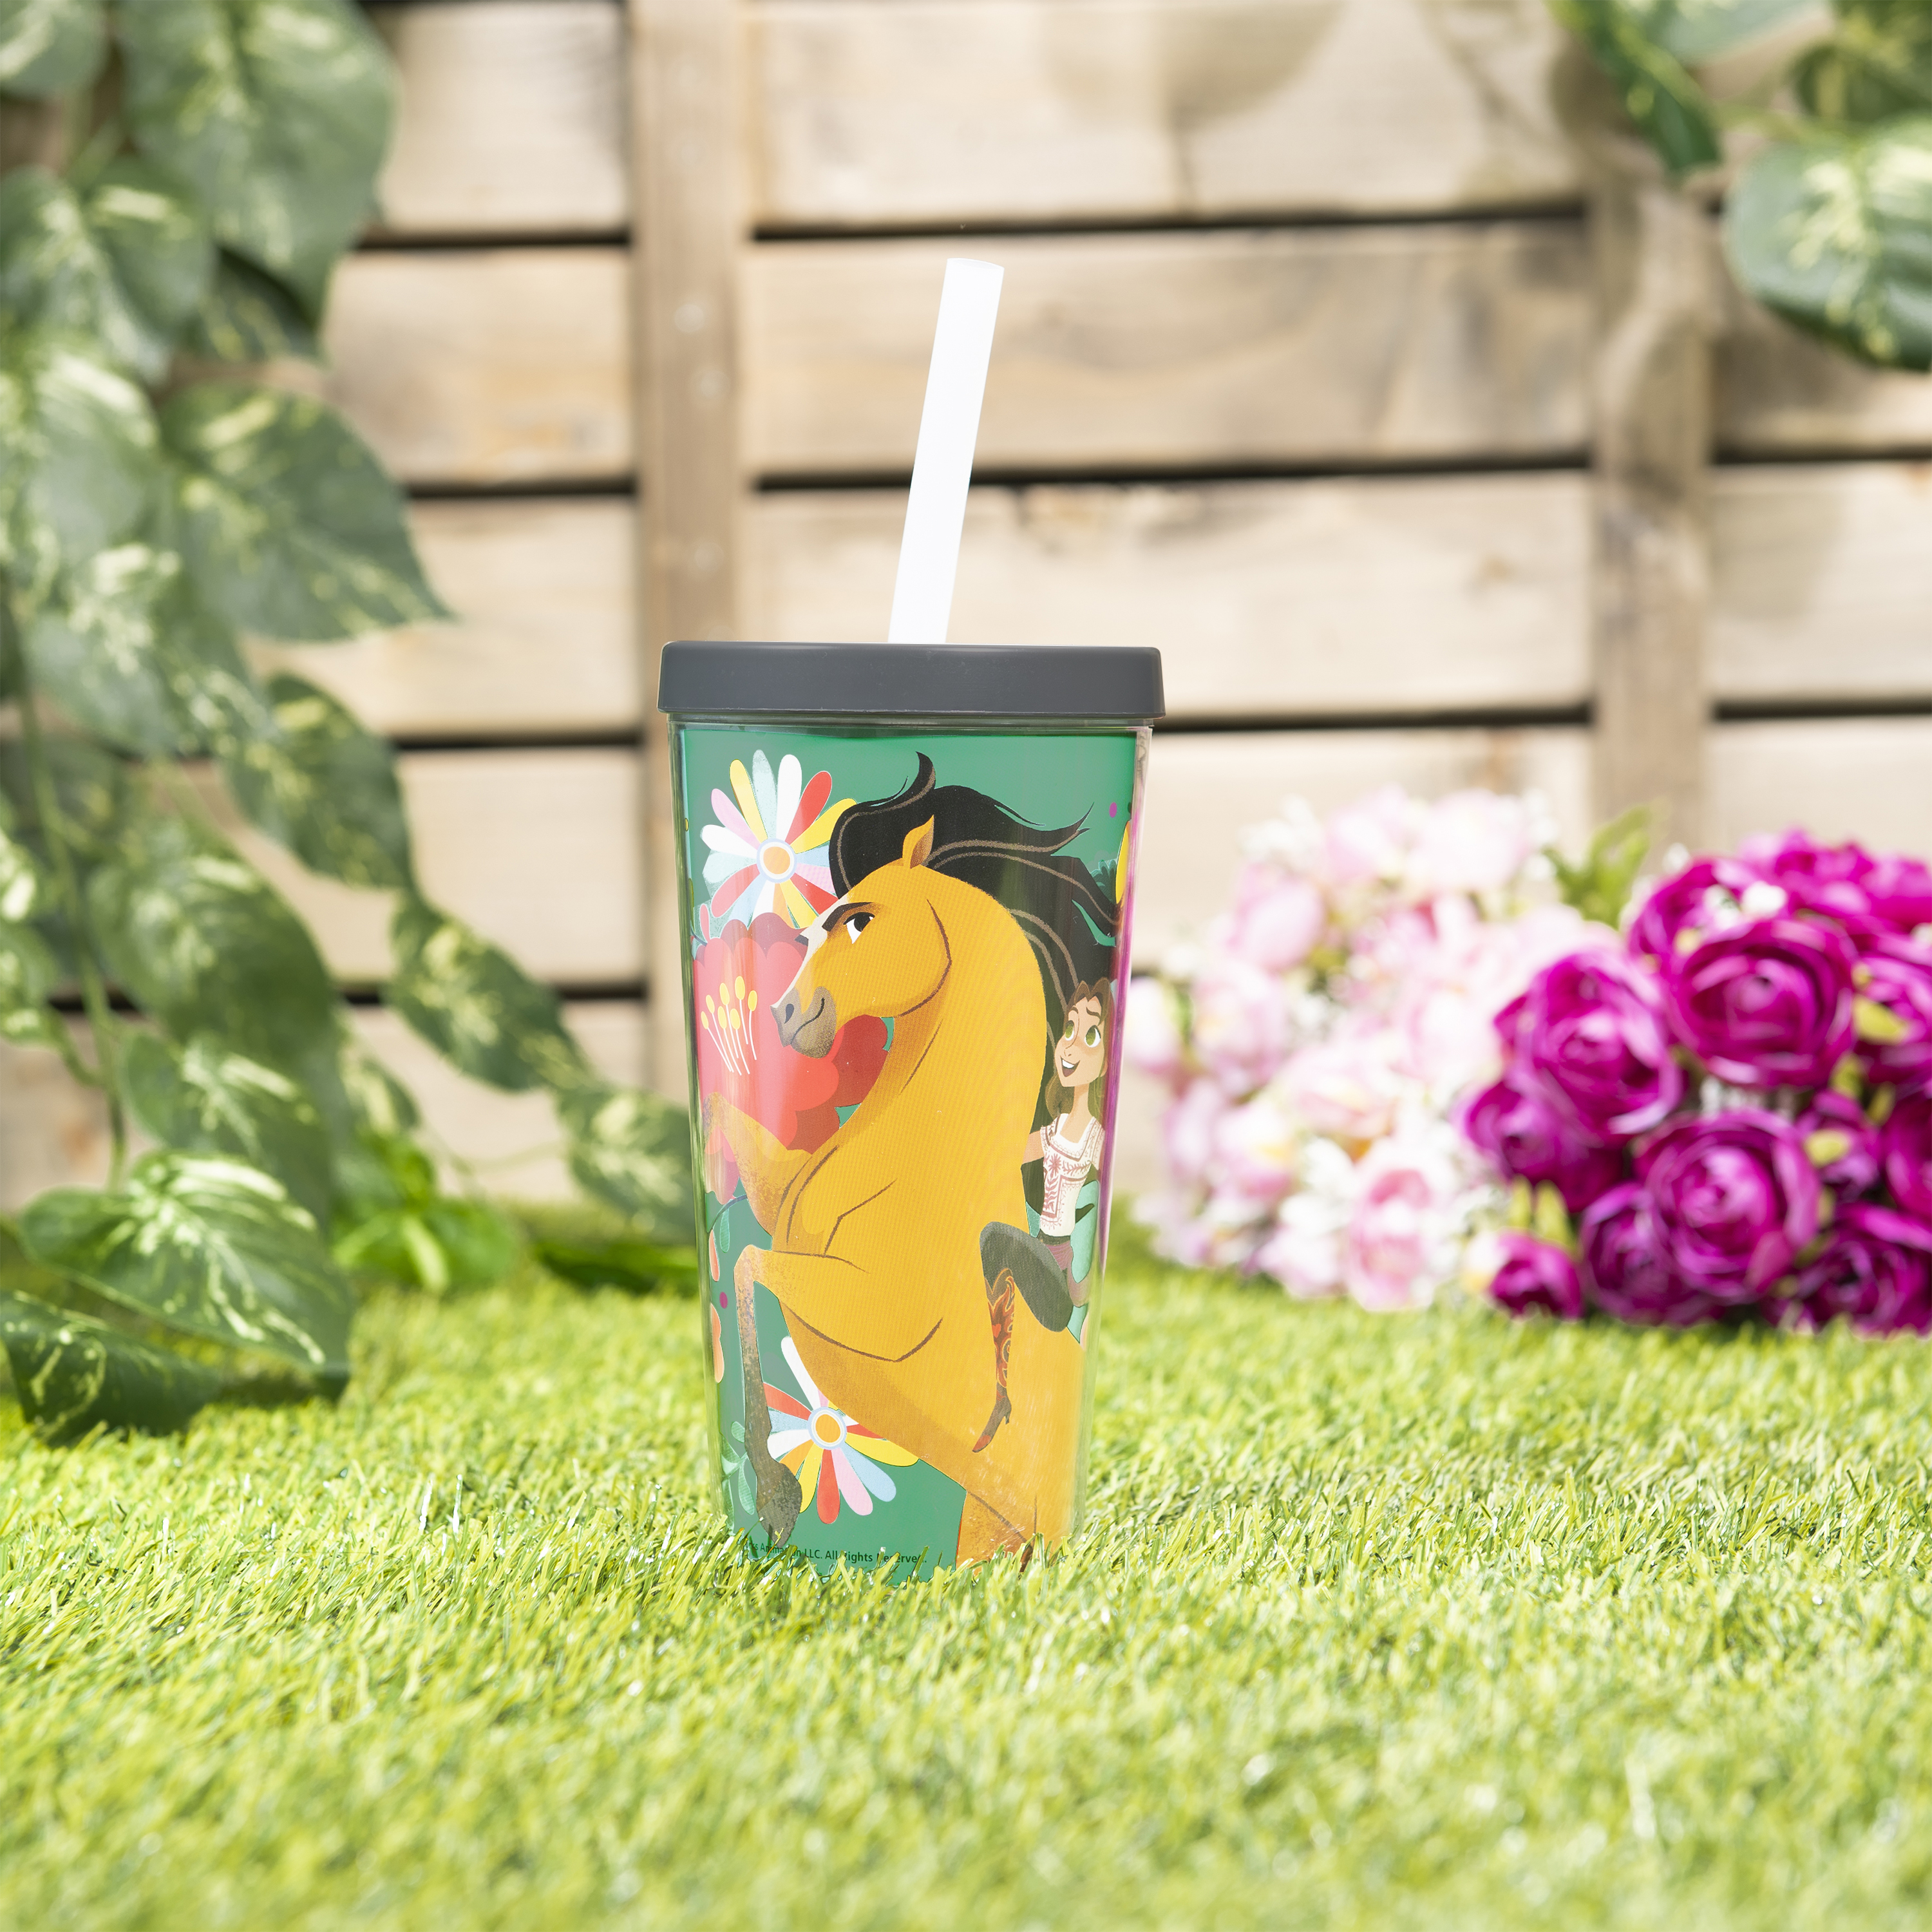 Dreamworks Animation 16 ounce Insulated Plastic Tumbler with Straw, Spirit Riding Free Movie slideshow image 6